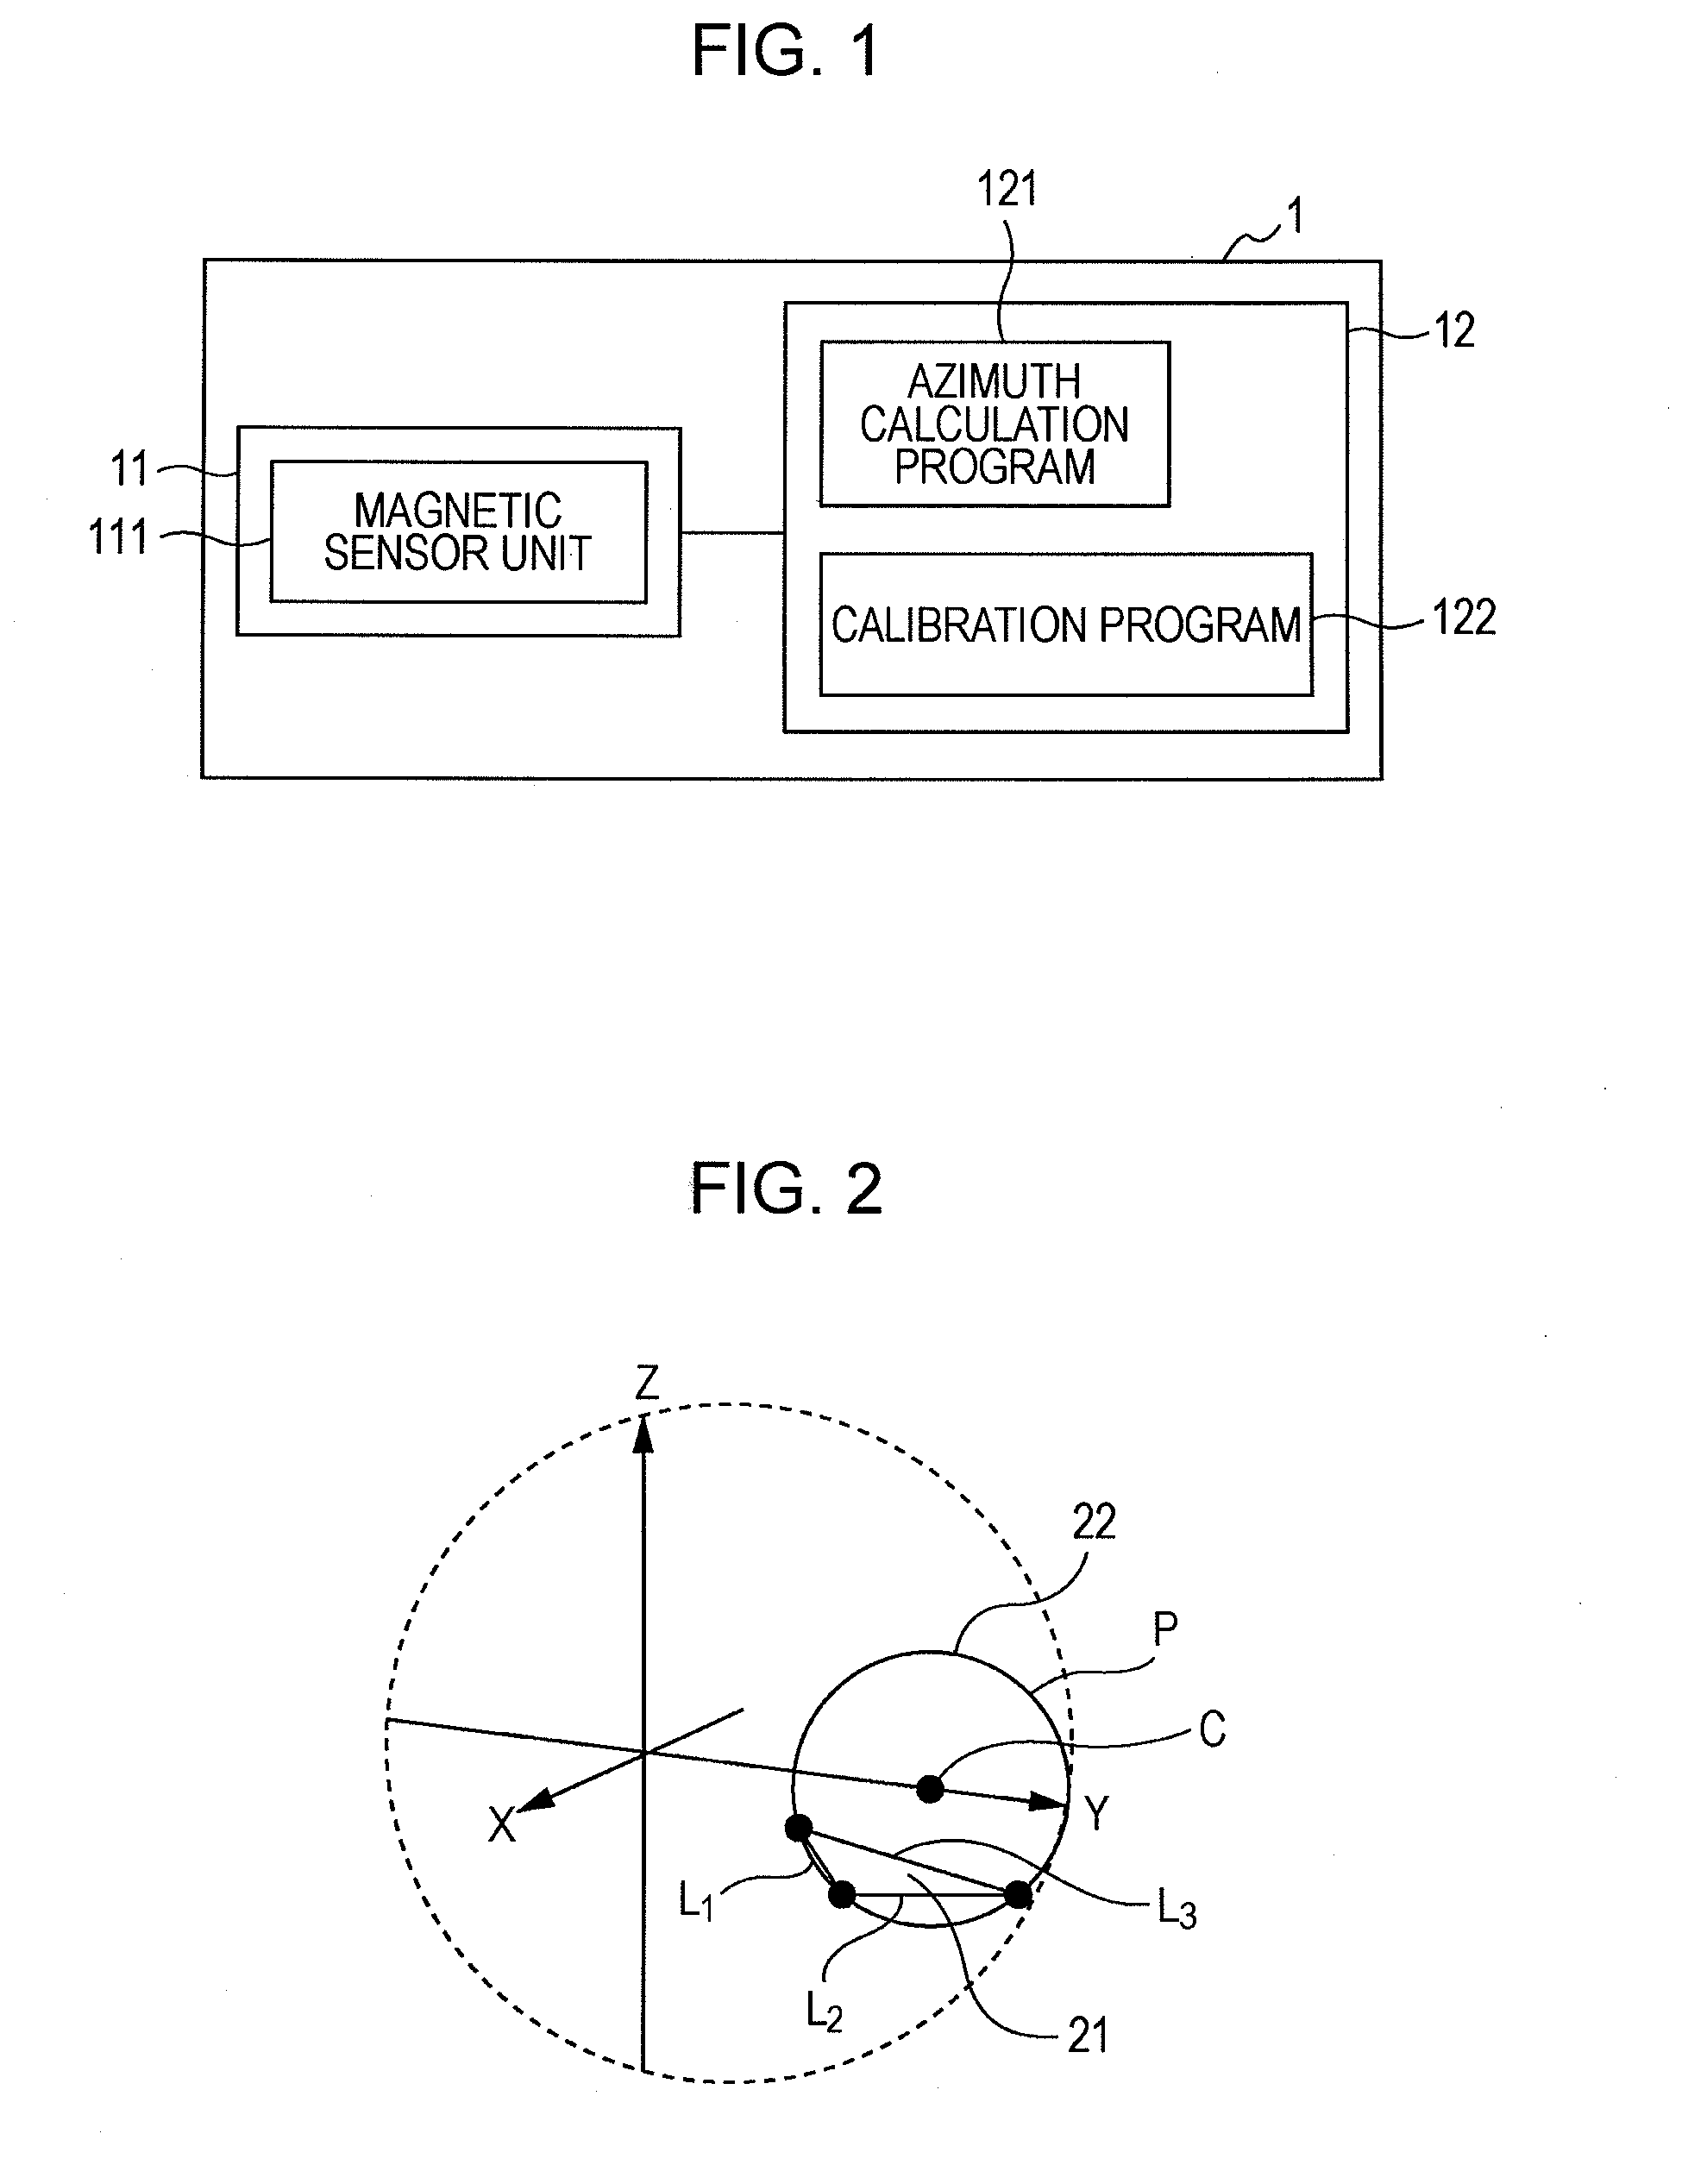 Azimuth calculation program and electronic compass